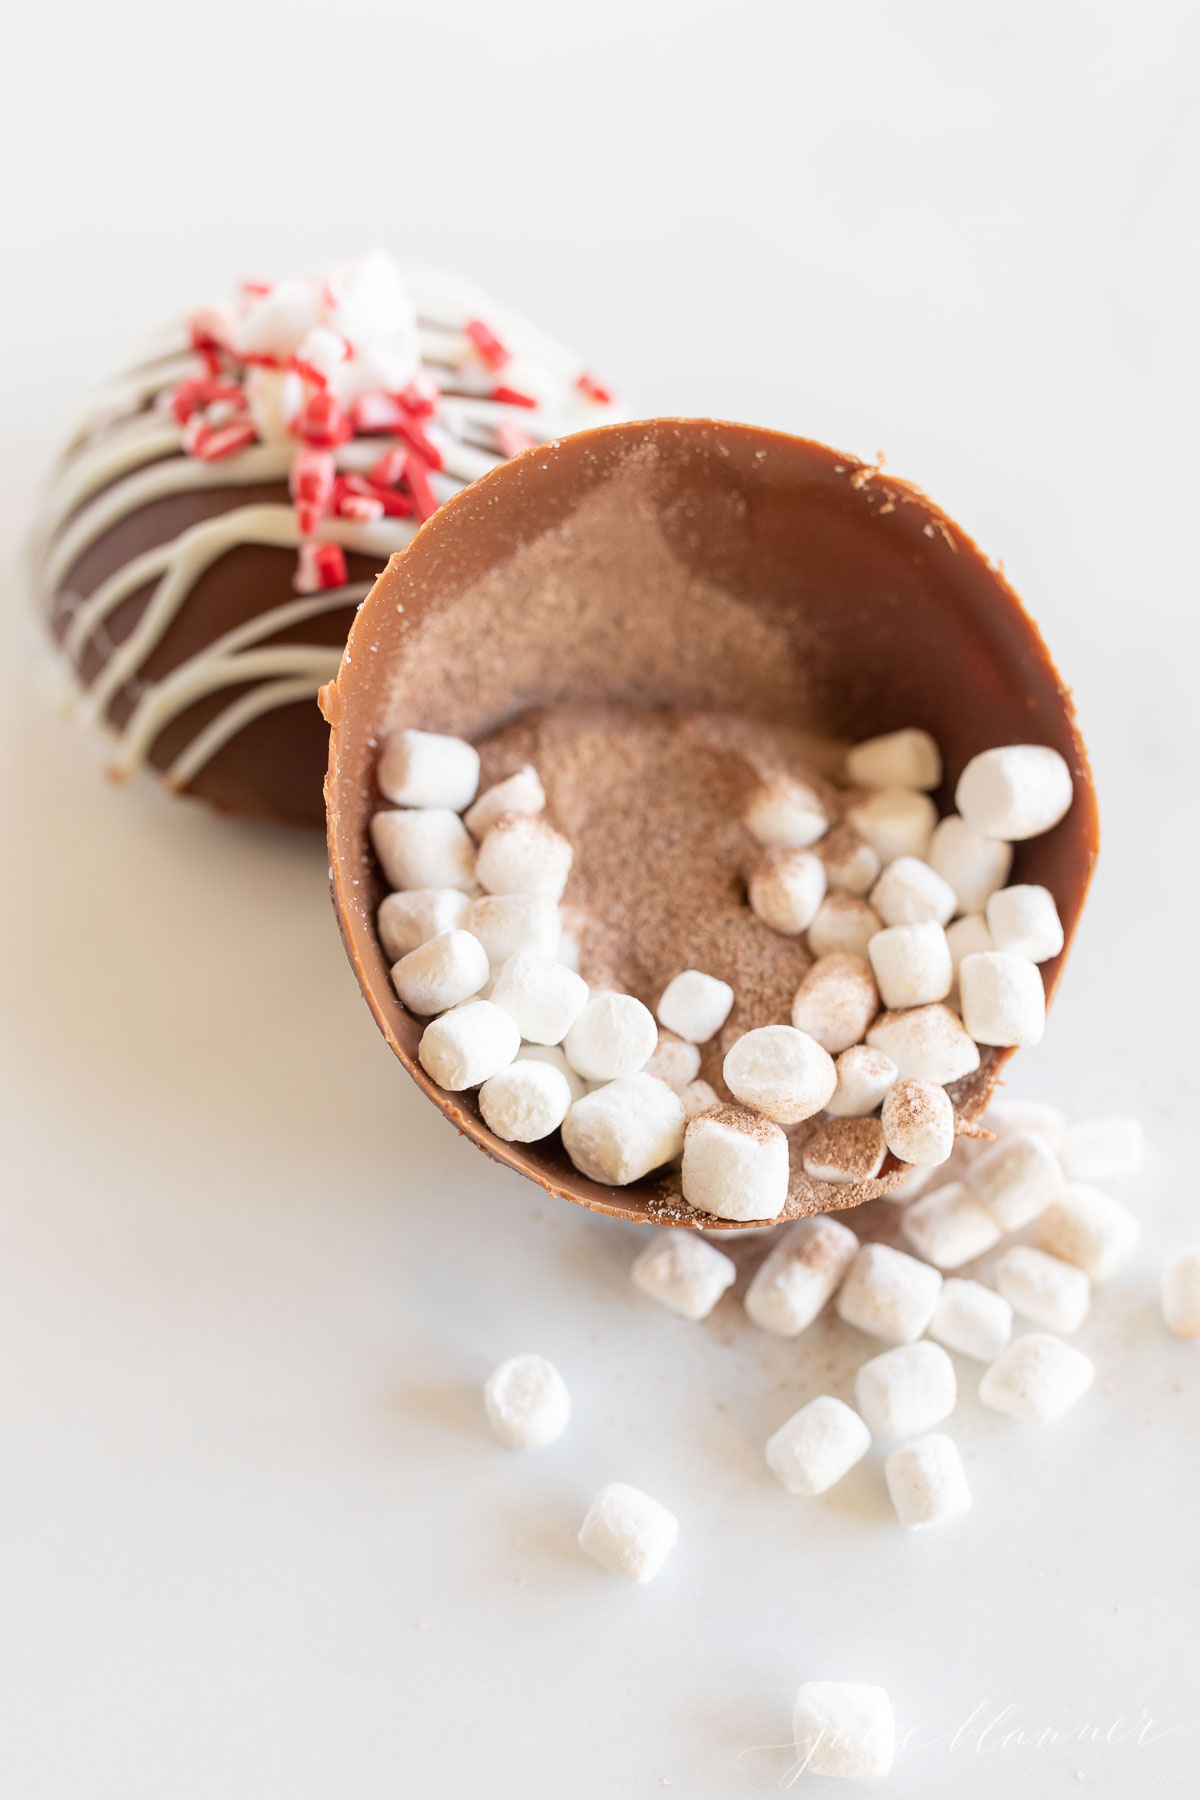 A hot chocolate bomb, a chocolate egg filled with marshmallows and chocolate.